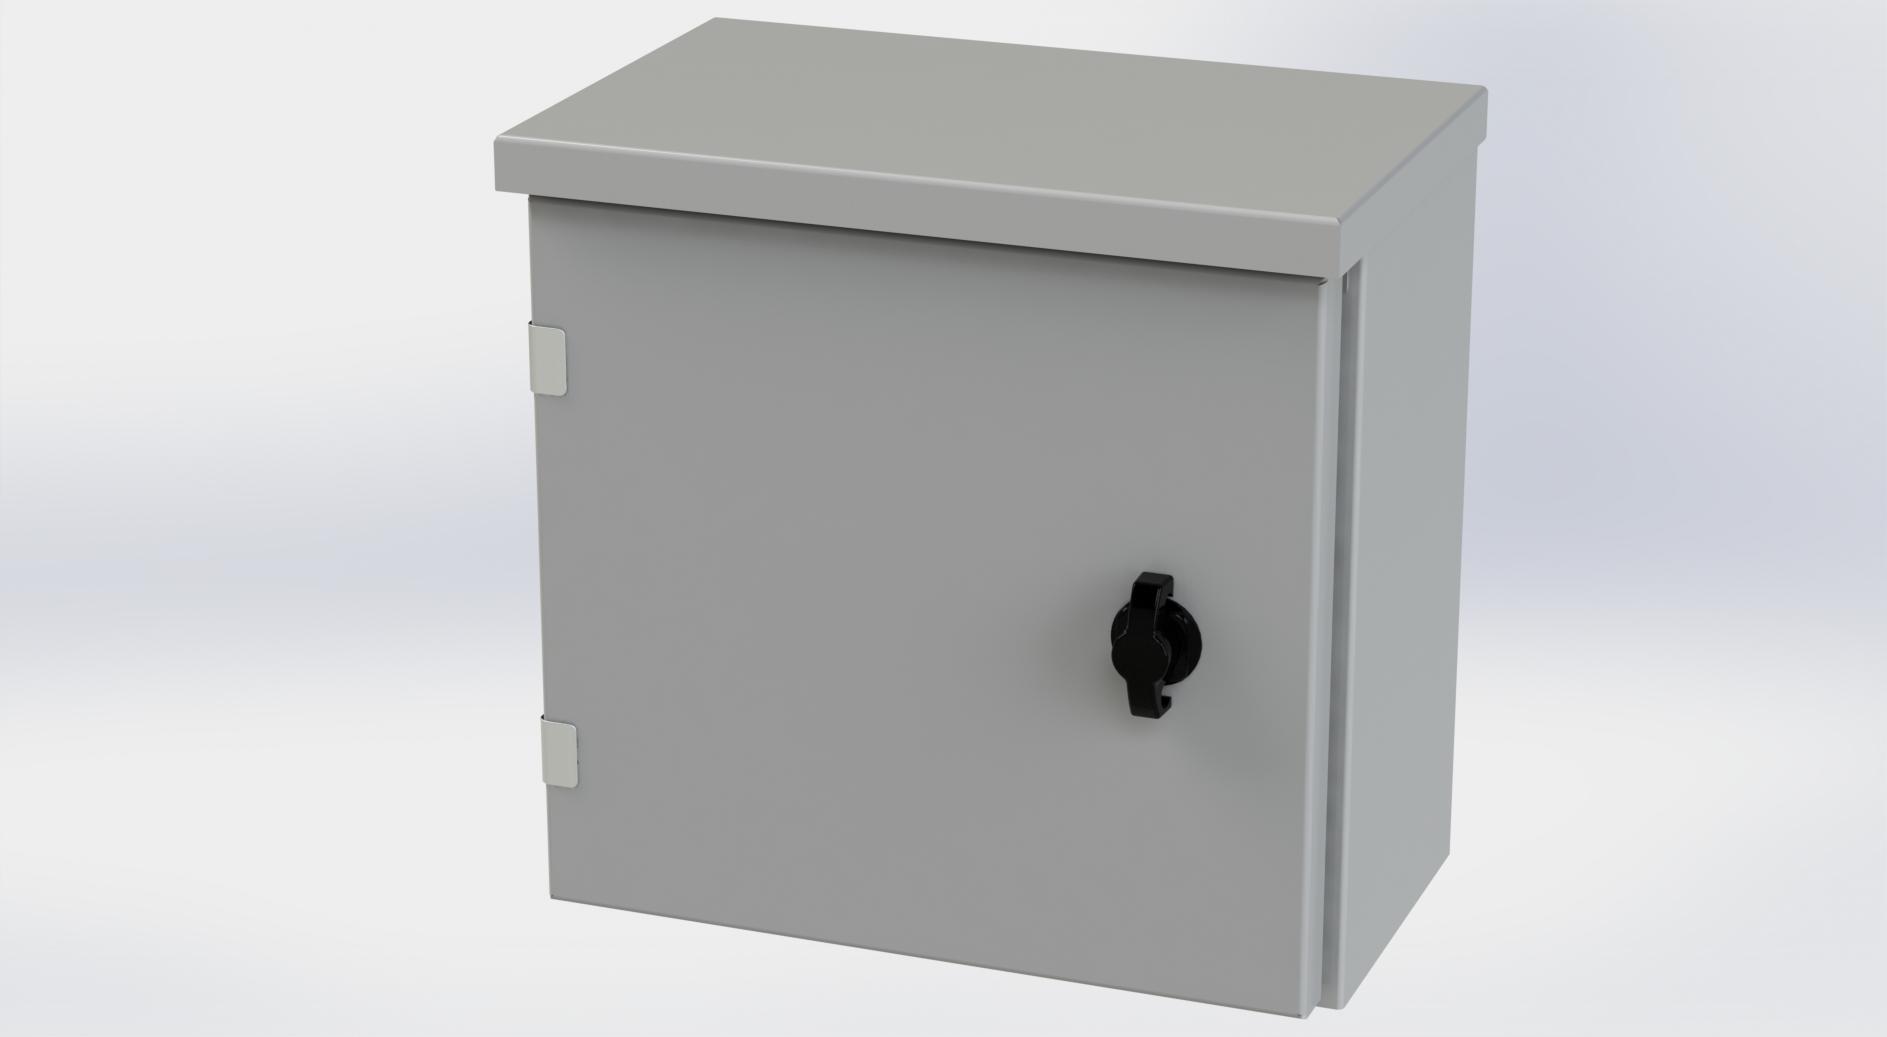 Saginaw Control SCE-12R1206LP Type-3R Hinged Cover Enclosure, Height:12.00", Width:12.00", Depth:6.00", ANSI-61 gray powder coating inside and out. Optional sub-panels are powder coated white.